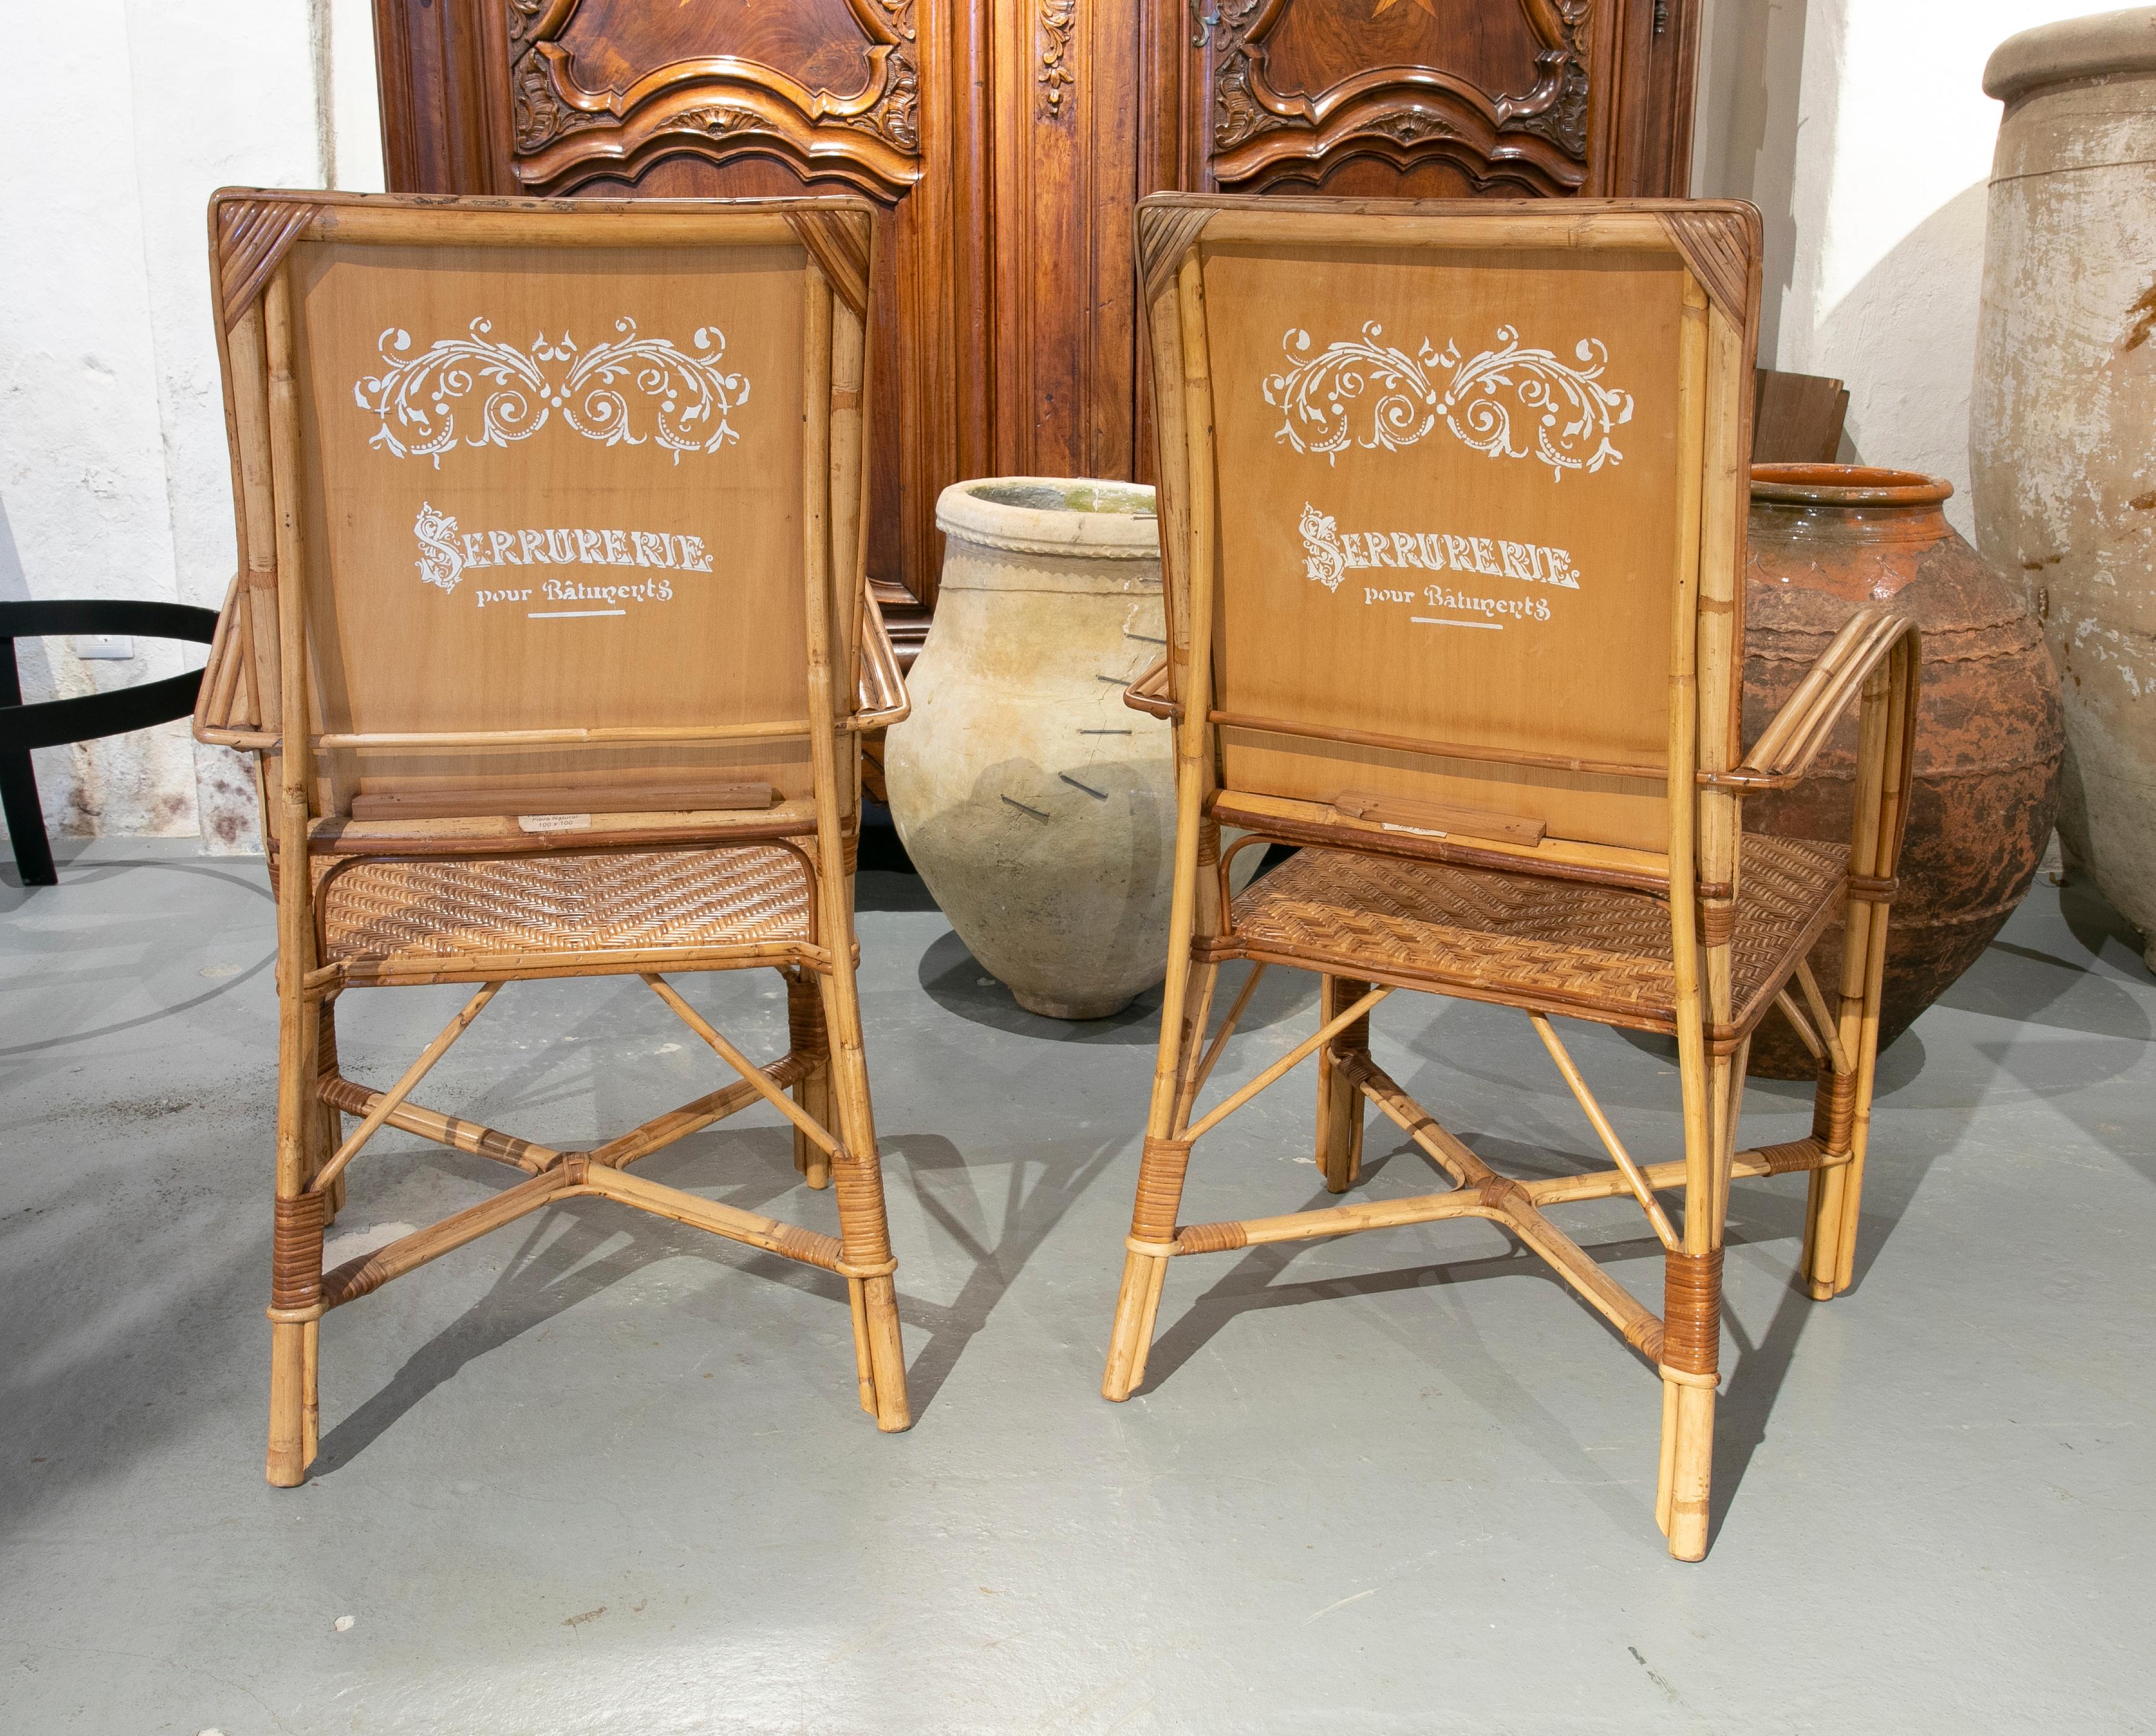 20th Century Pair of Handmade Spanish Wicker Armchairs from the 1970ies For Sale